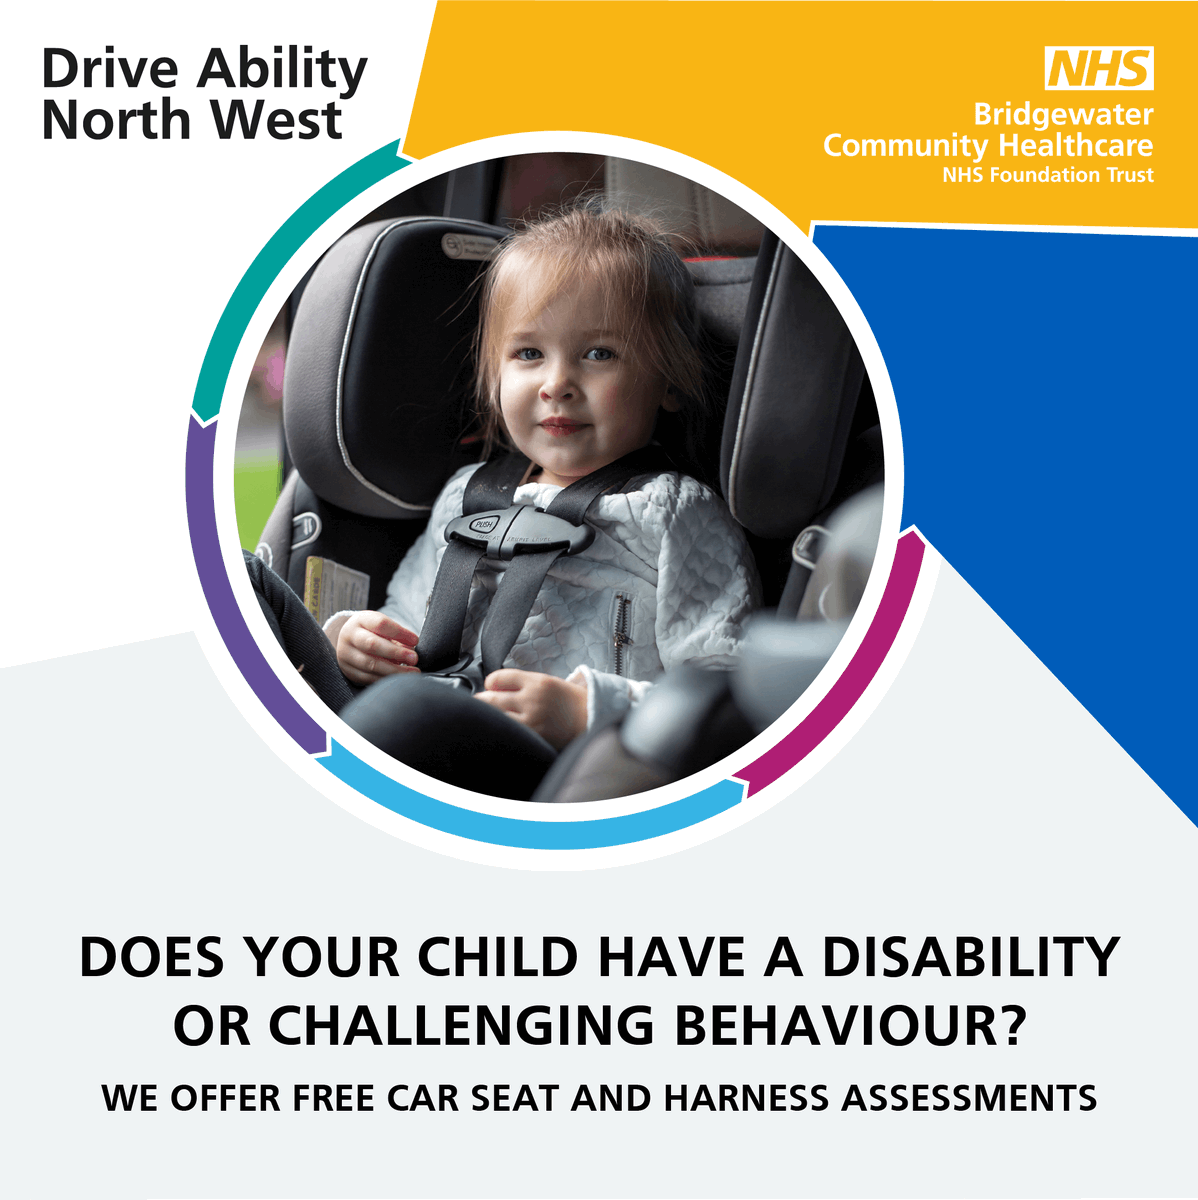 Find it hard to get out and about❓ If your child has a disability or challenging behaviour, we can help with a free car seat and harness assessment ✅ 📲 01942 483 713 💻bridgewater.nhs.uk/drive #CarSeat #SafeTravel #AccessibleTravel @DrivingMob